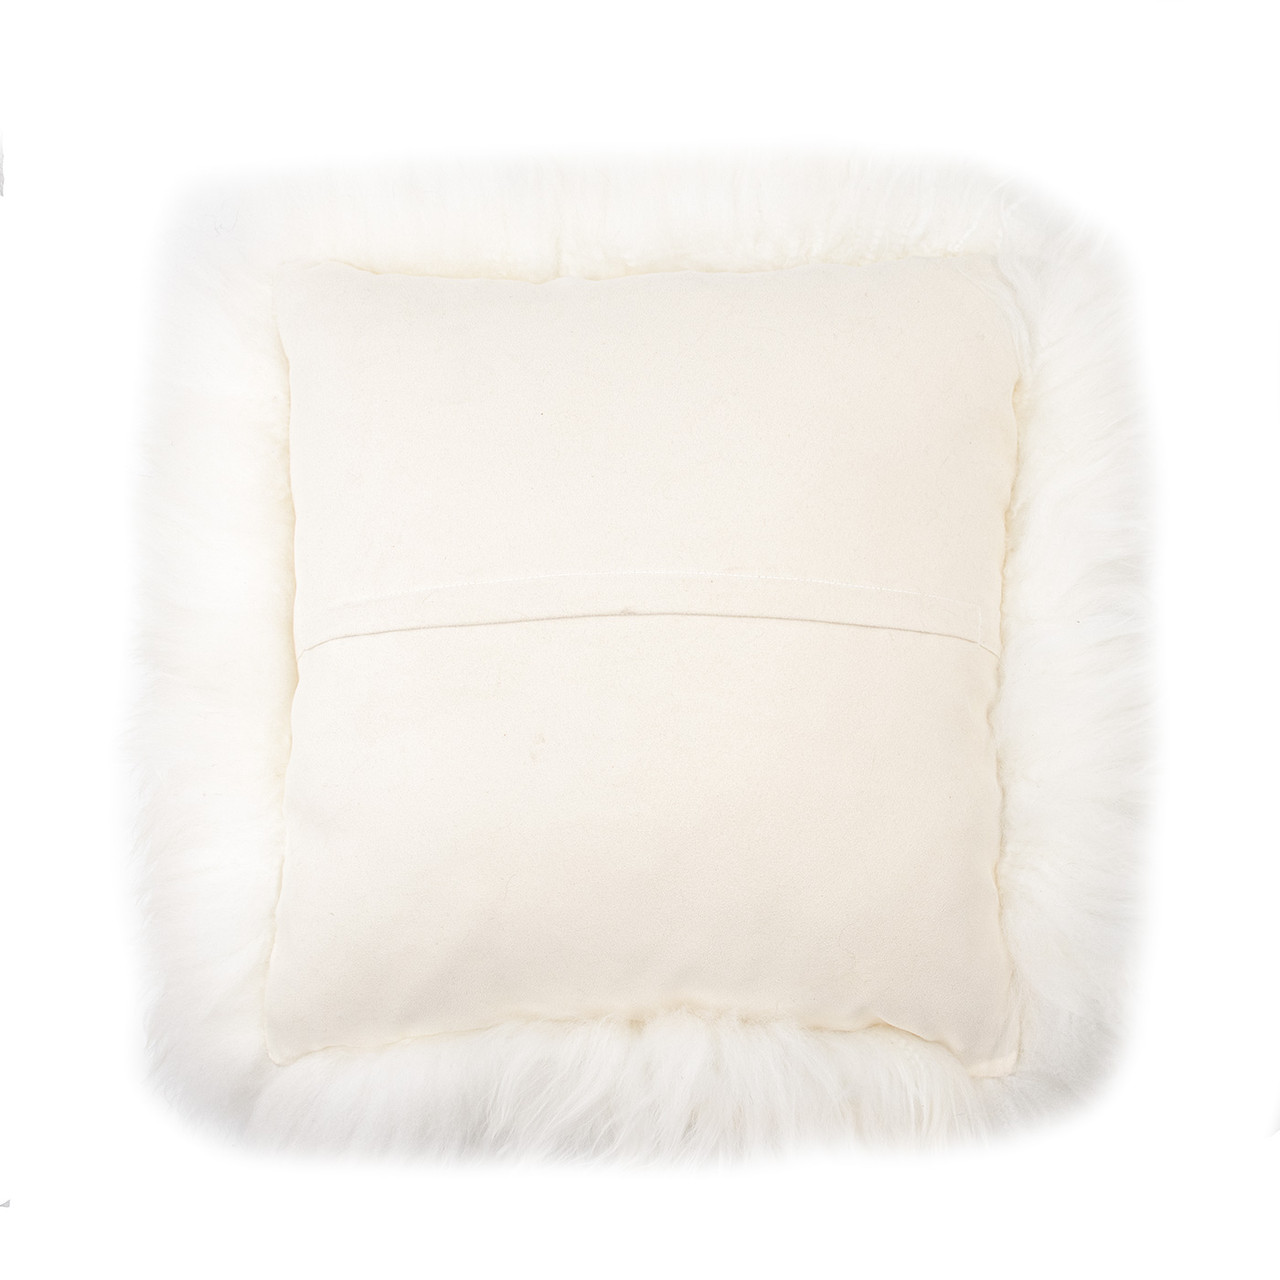 Faux Sheepskin Deluxe Back Rest Support Cushion - Lower Back Support and Comfort for Chair or Bed, Beige, 32L x 5 1/2'W x 27H